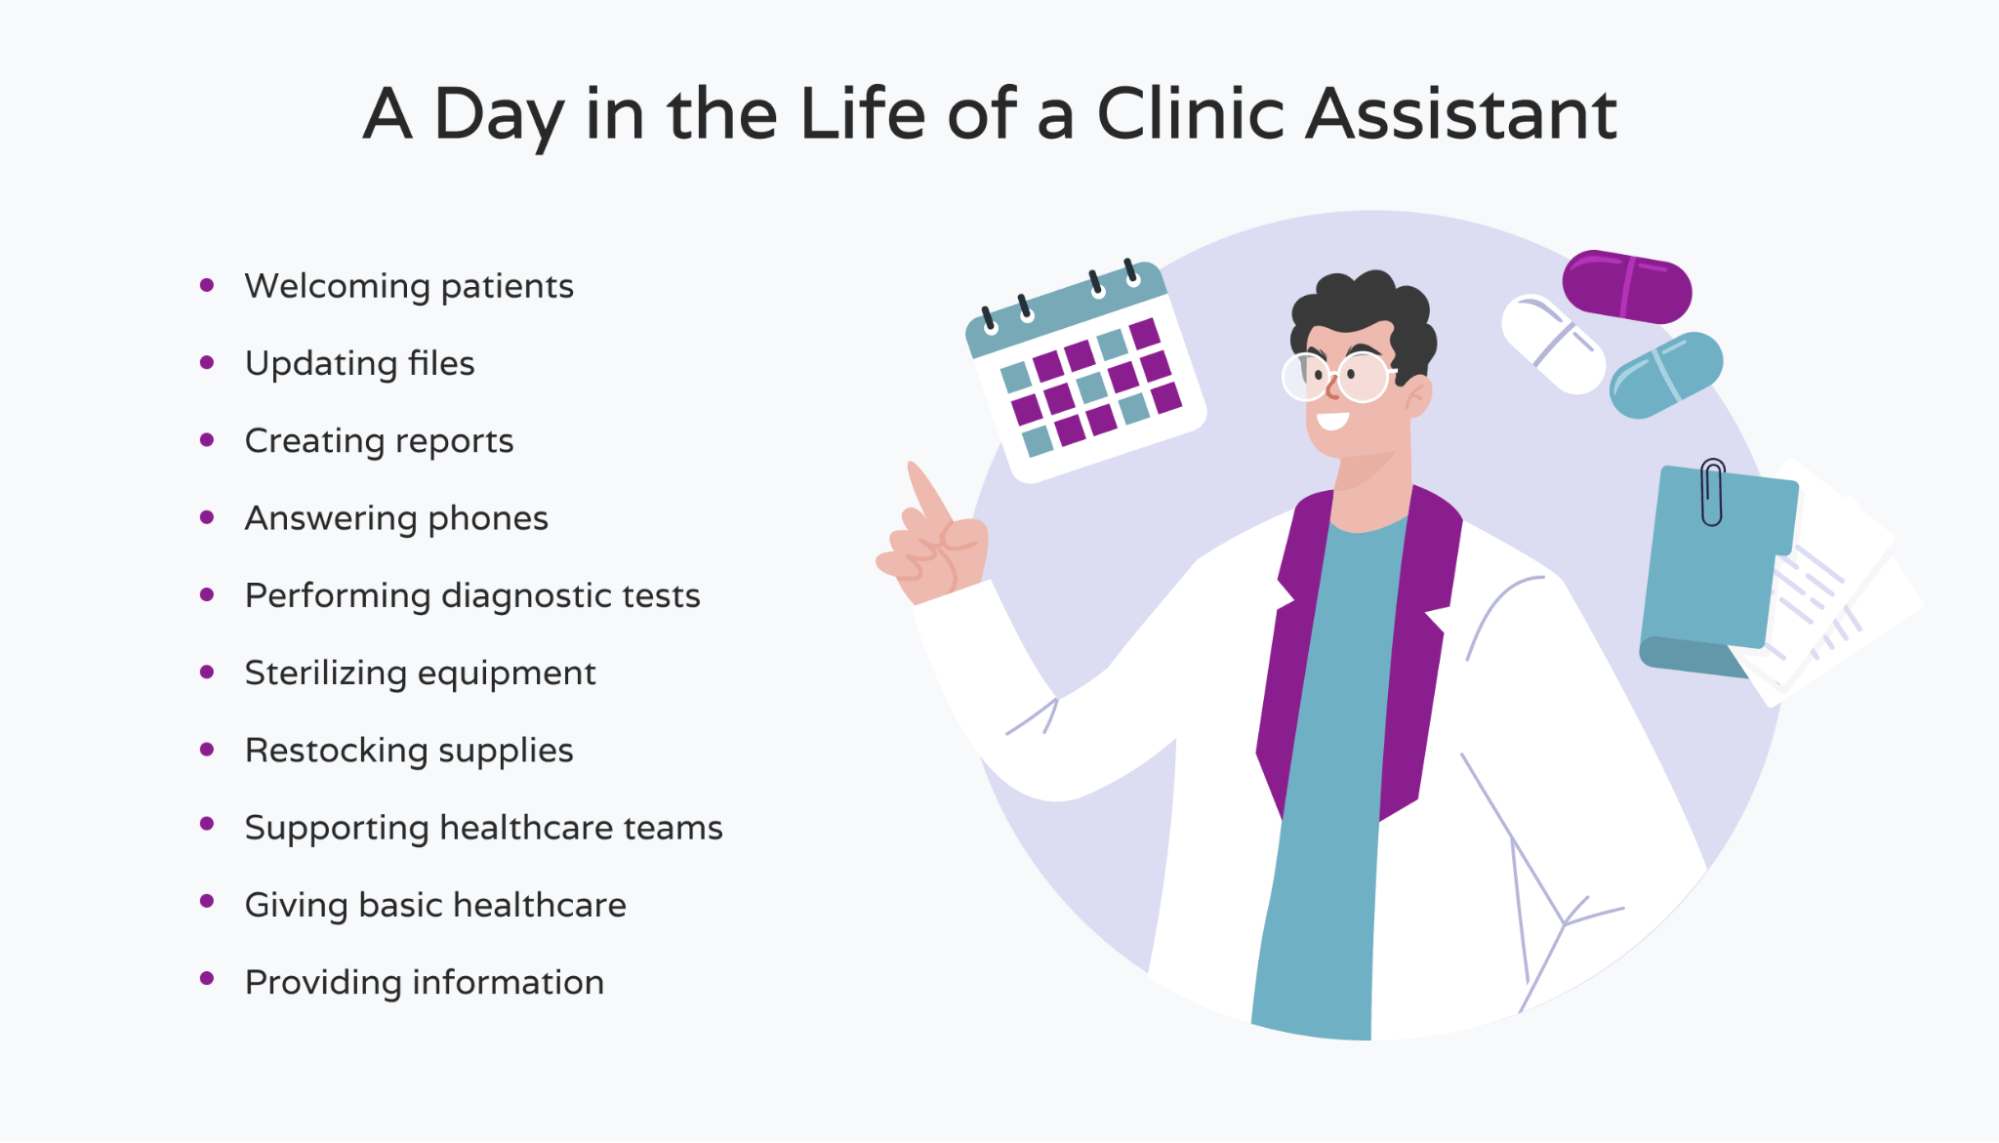 A day in the life of a clinic assistant